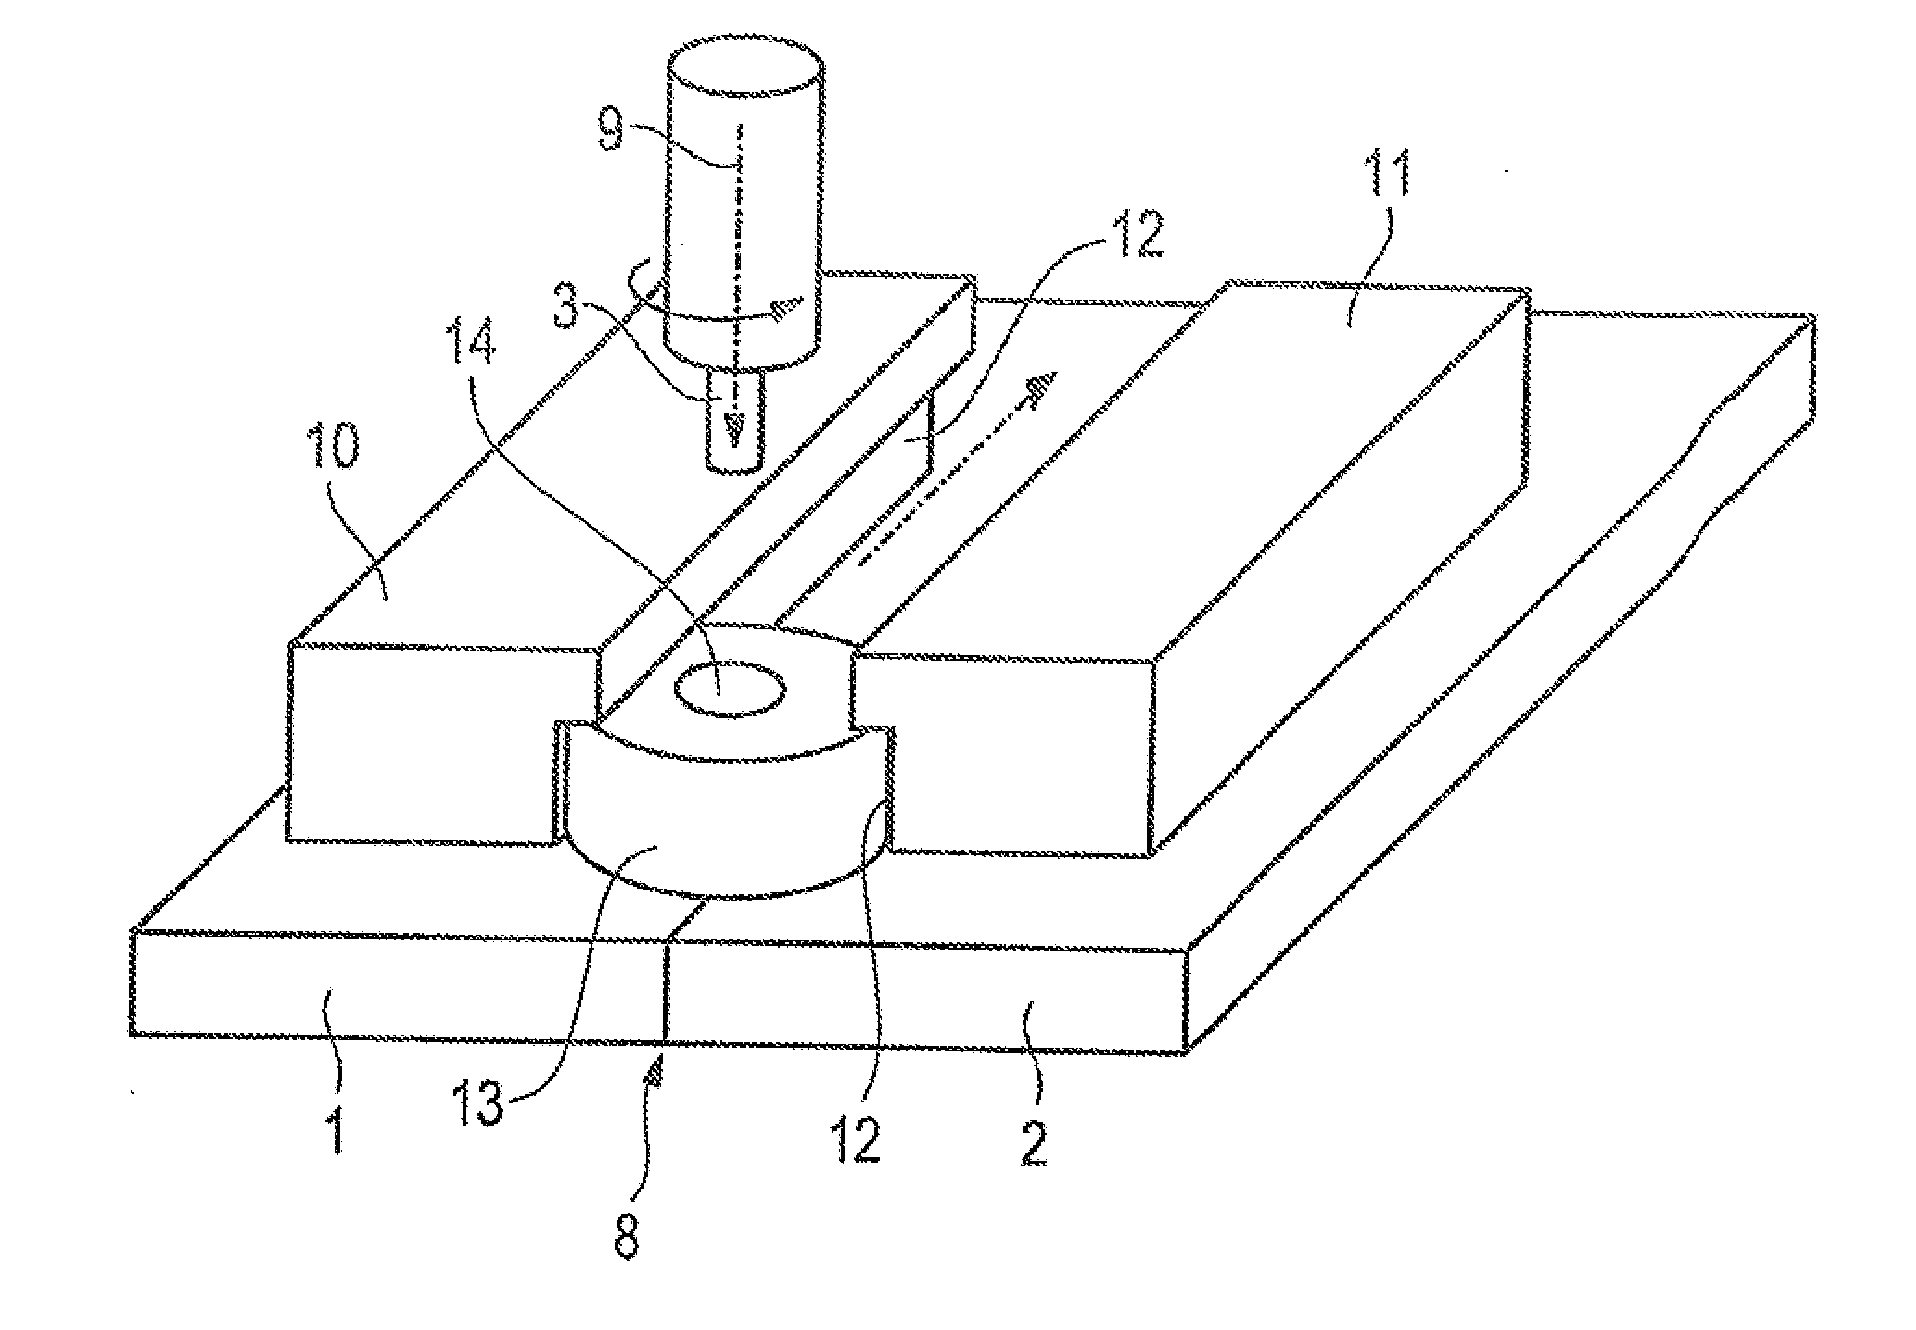 Friction stir welding apparatus and method for joining workpieces by means of a friction stir welding process